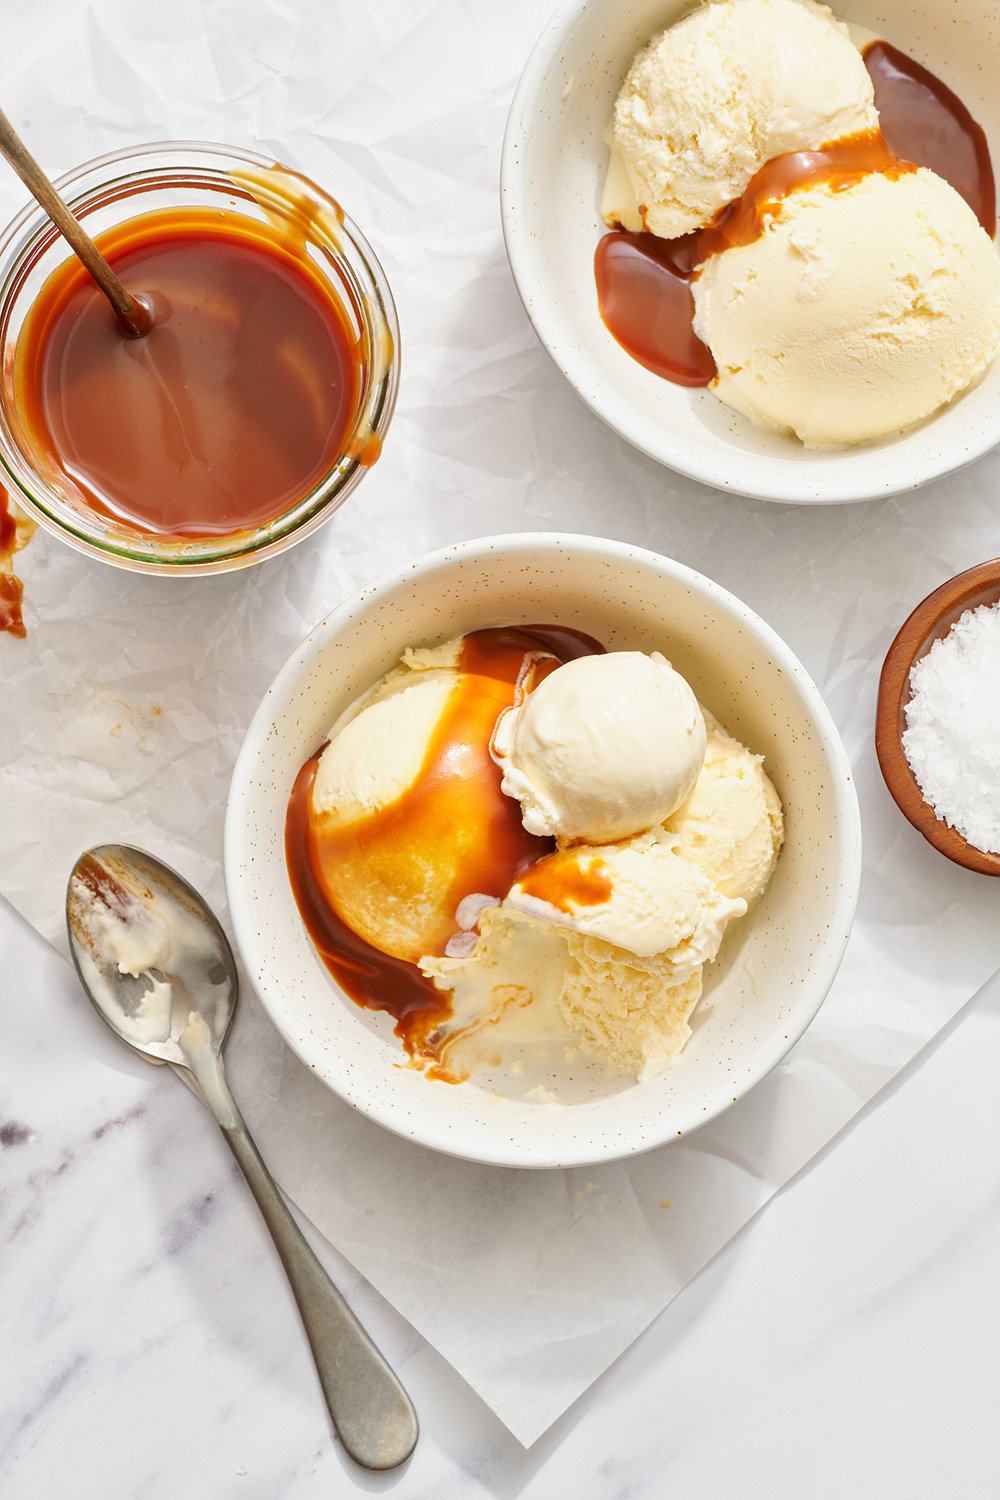 small white bowls of vanilla ice cream, each drizzled with caramel sauce, and spoons nearby, ready to serve.